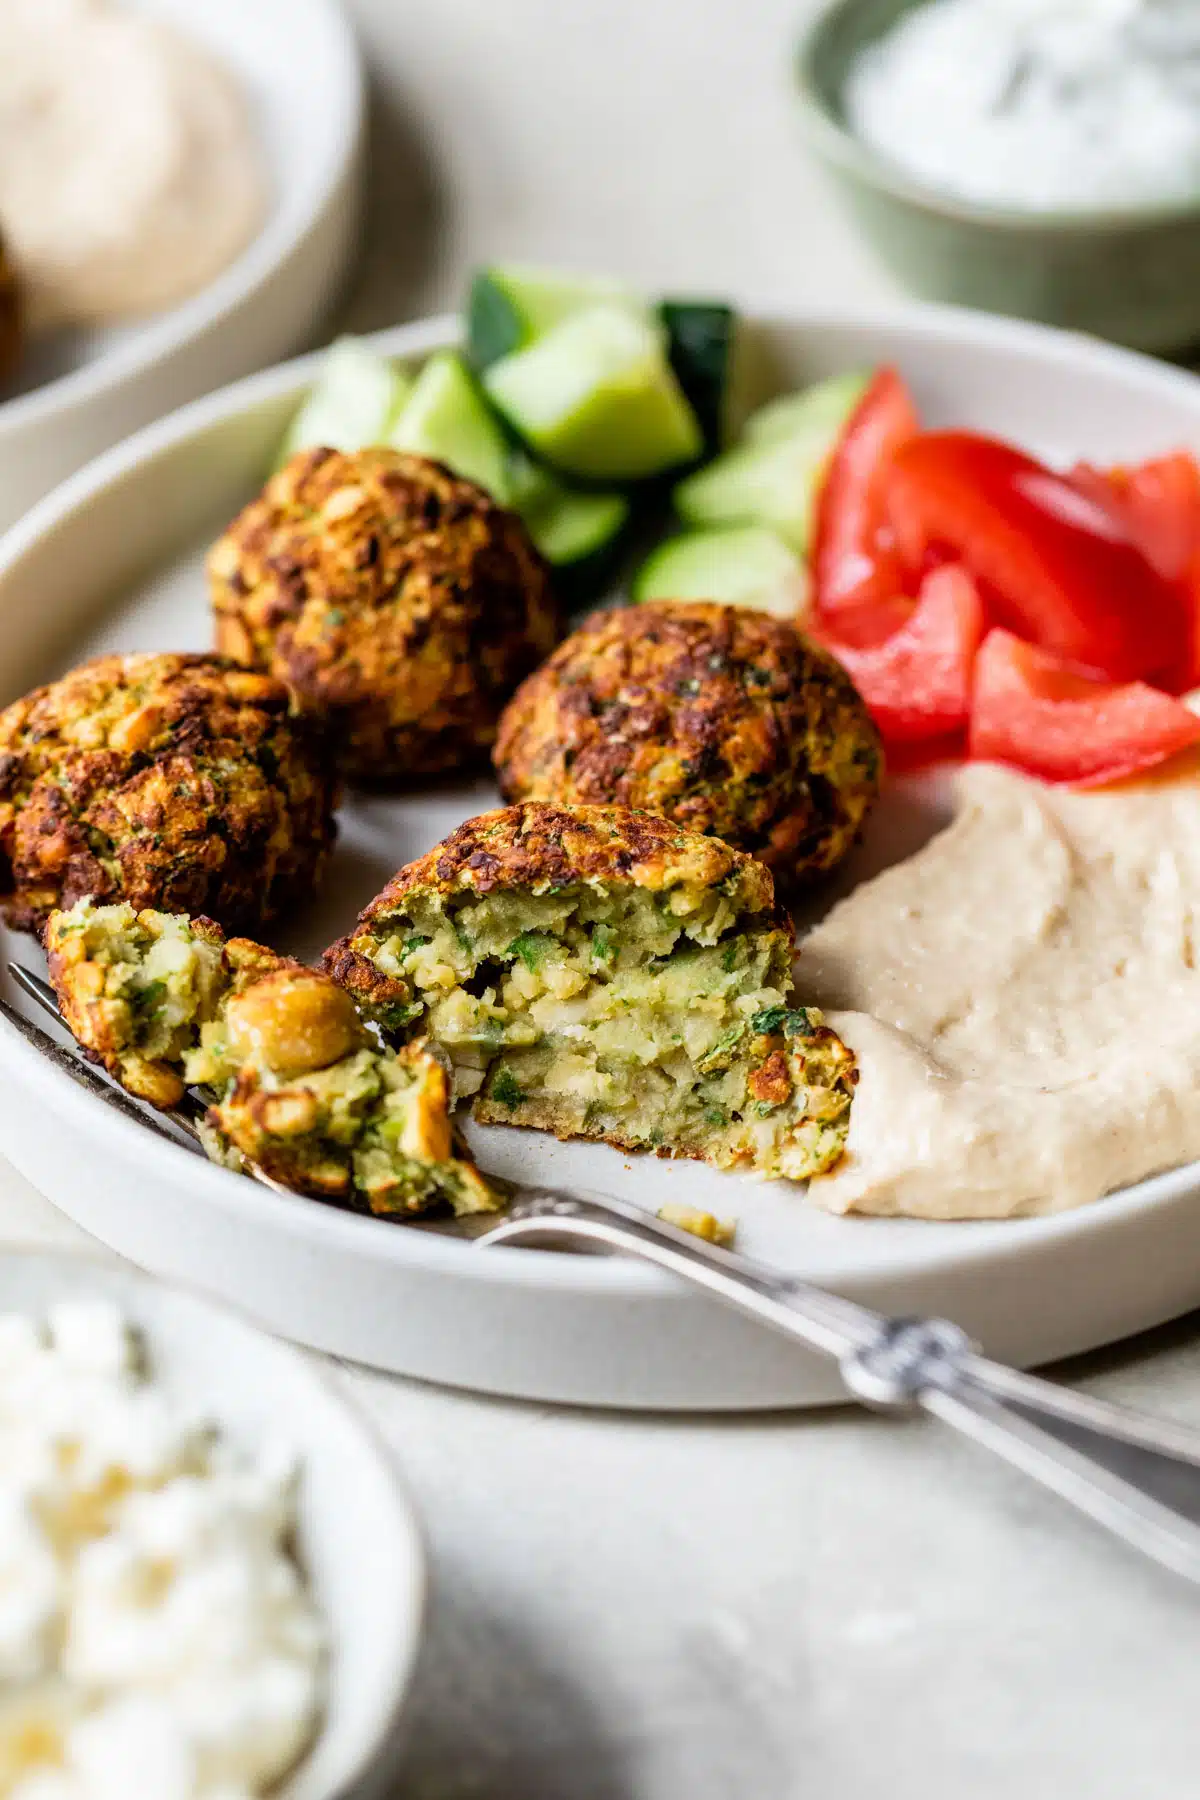 falafel on a plate with hummus, tomatoes and cucumber